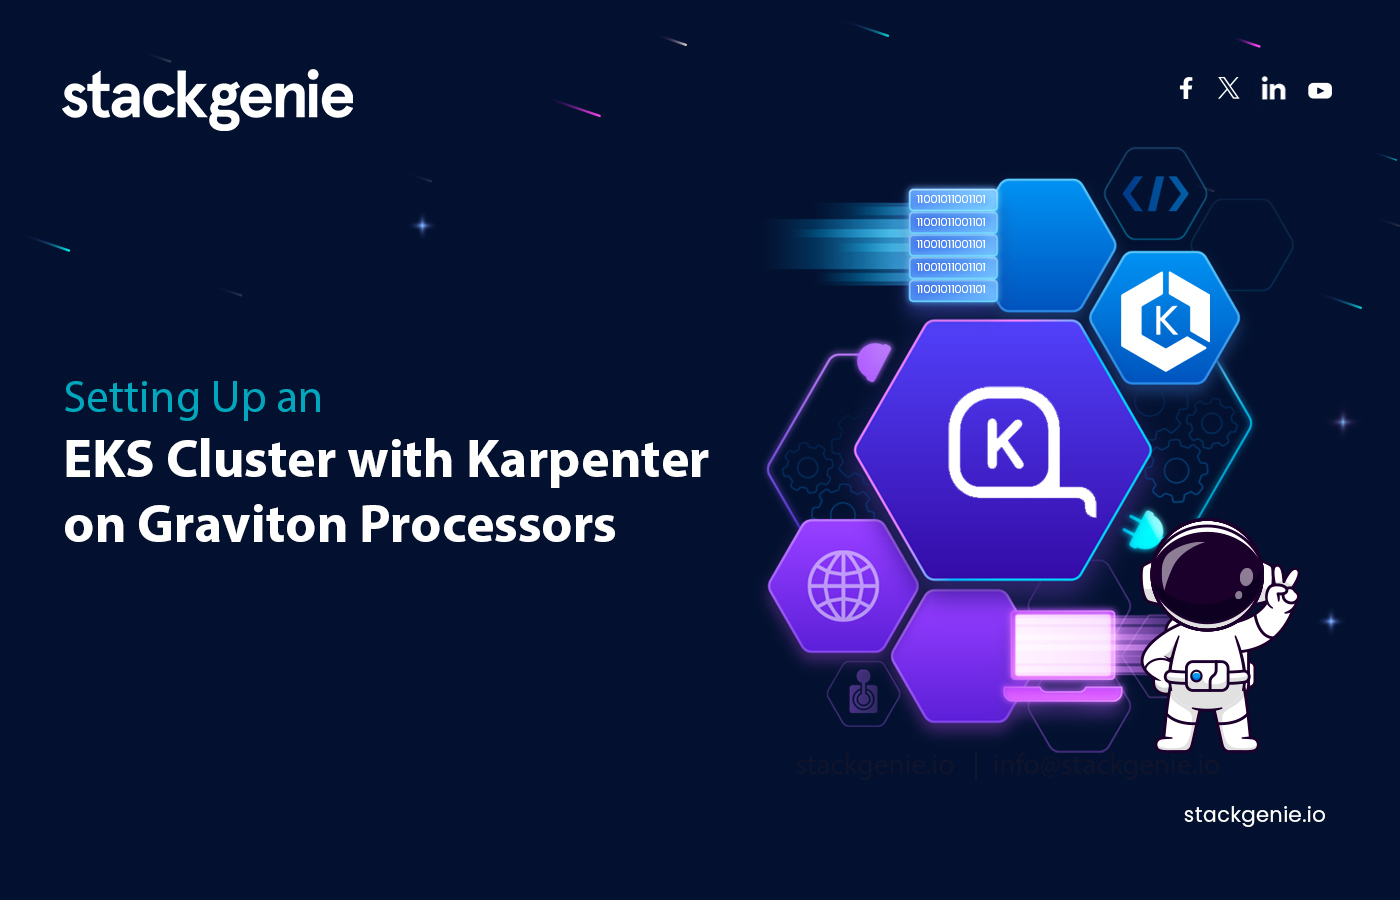 Setting Up an EKS Cluster with Karpenter on Graviton Processors